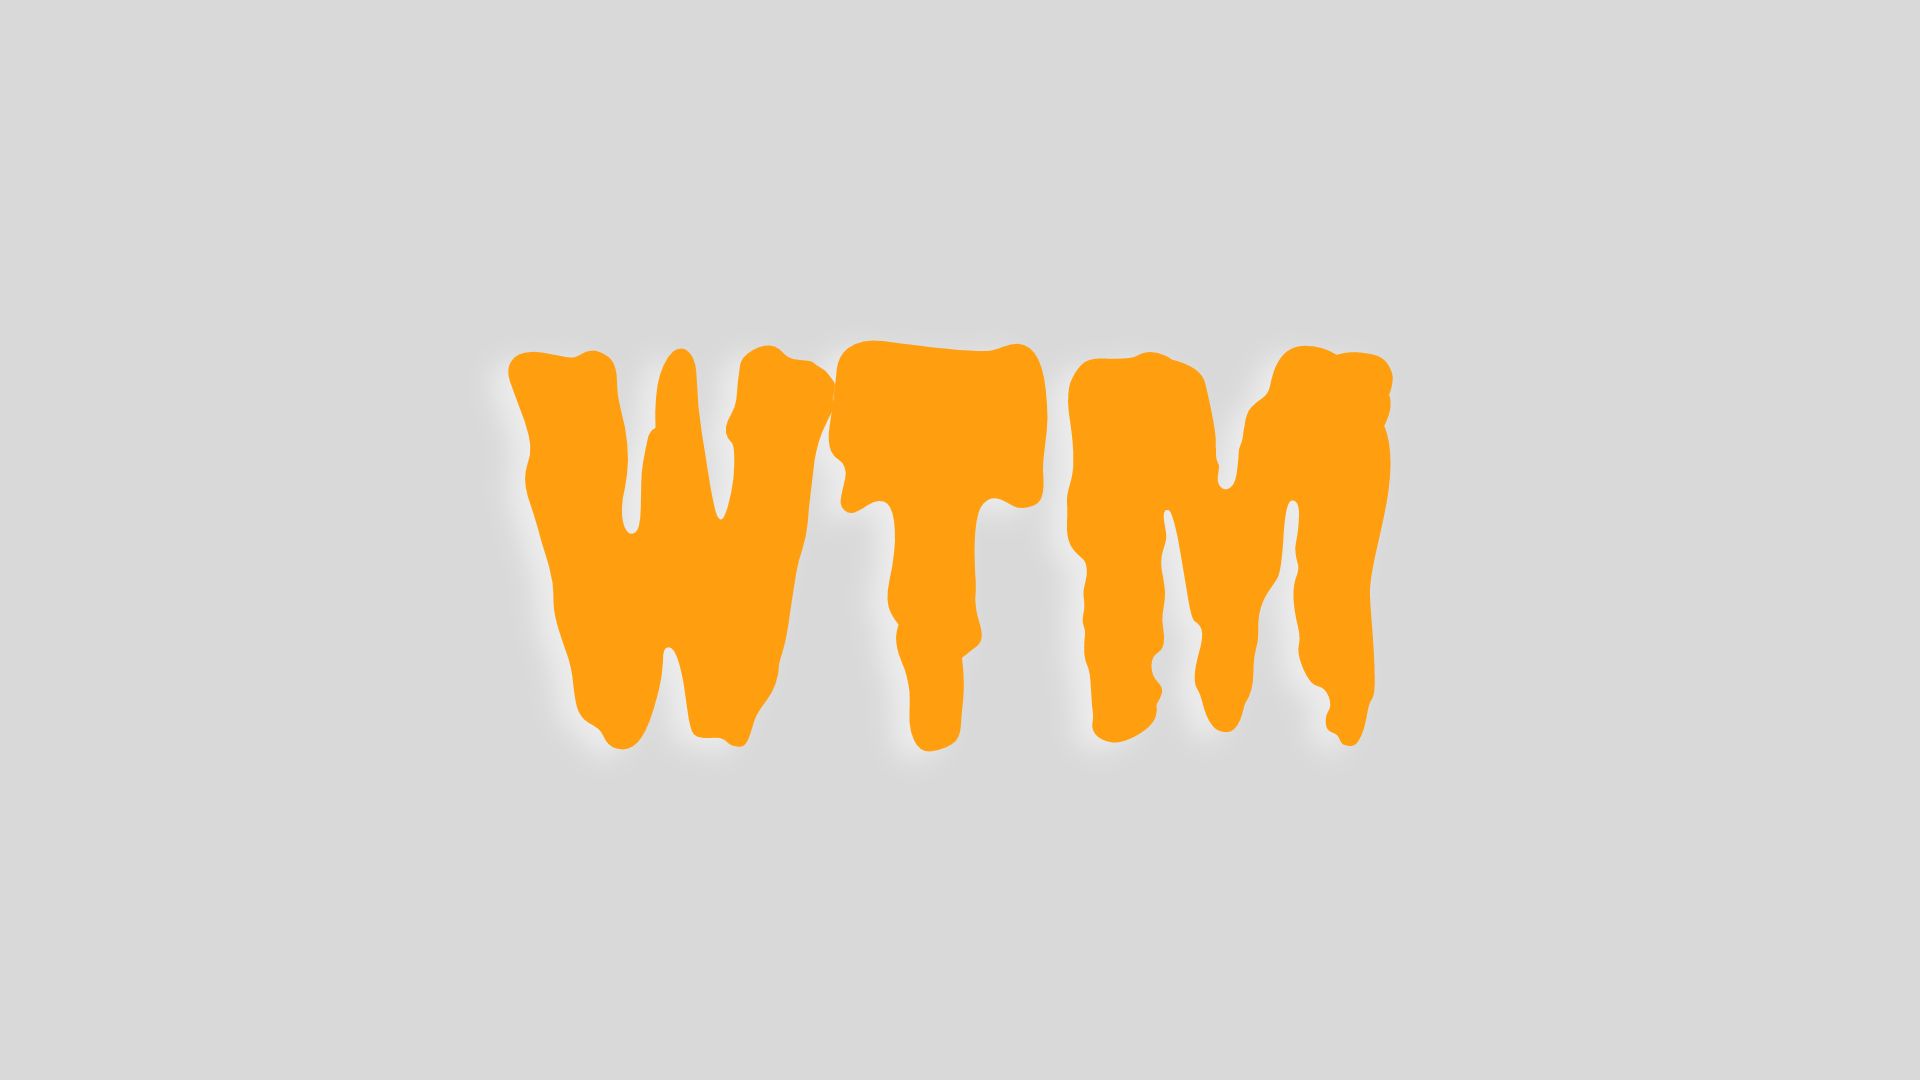 What does WTM mean on Snapchat?